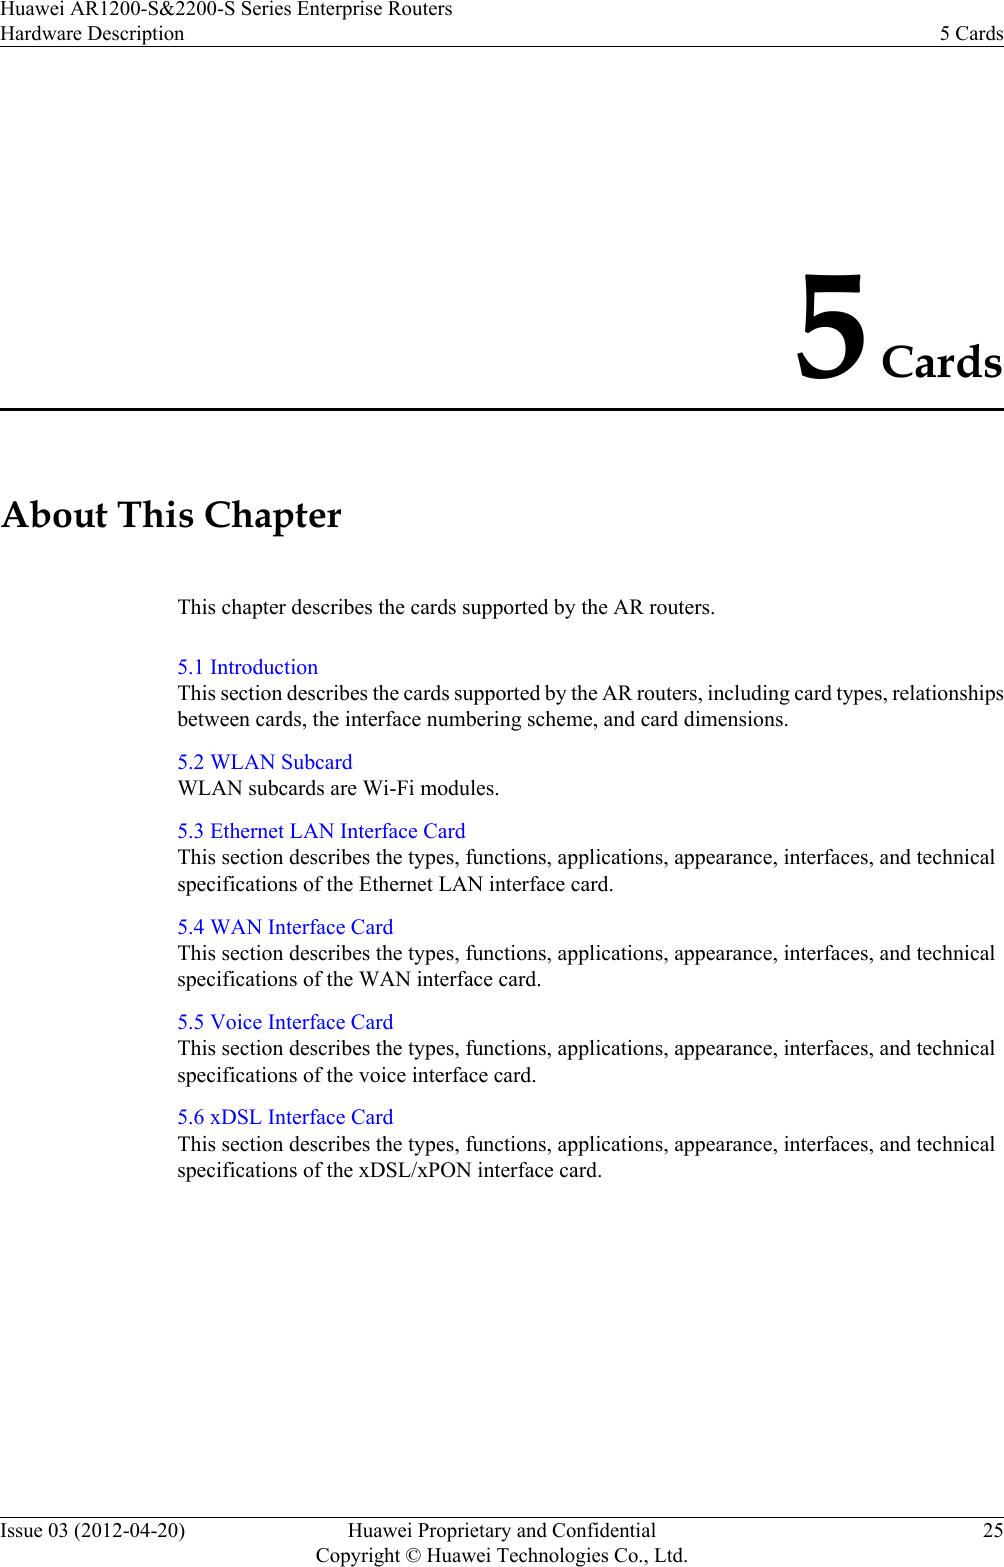 5 CardsAbout This ChapterThis chapter describes the cards supported by the AR routers.5.1 IntroductionThis section describes the cards supported by the AR routers, including card types, relationshipsbetween cards, the interface numbering scheme, and card dimensions.5.2 WLAN SubcardWLAN subcards are Wi-Fi modules.5.3 Ethernet LAN Interface CardThis section describes the types, functions, applications, appearance, interfaces, and technicalspecifications of the Ethernet LAN interface card.5.4 WAN Interface CardThis section describes the types, functions, applications, appearance, interfaces, and technicalspecifications of the WAN interface card.5.5 Voice Interface CardThis section describes the types, functions, applications, appearance, interfaces, and technicalspecifications of the voice interface card.5.6 xDSL Interface CardThis section describes the types, functions, applications, appearance, interfaces, and technicalspecifications of the xDSL/xPON interface card.Huawei AR1200-S&amp;2200-S Series Enterprise RoutersHardware Description 5 CardsIssue 03 (2012-04-20) Huawei Proprietary and ConfidentialCopyright © Huawei Technologies Co., Ltd.25